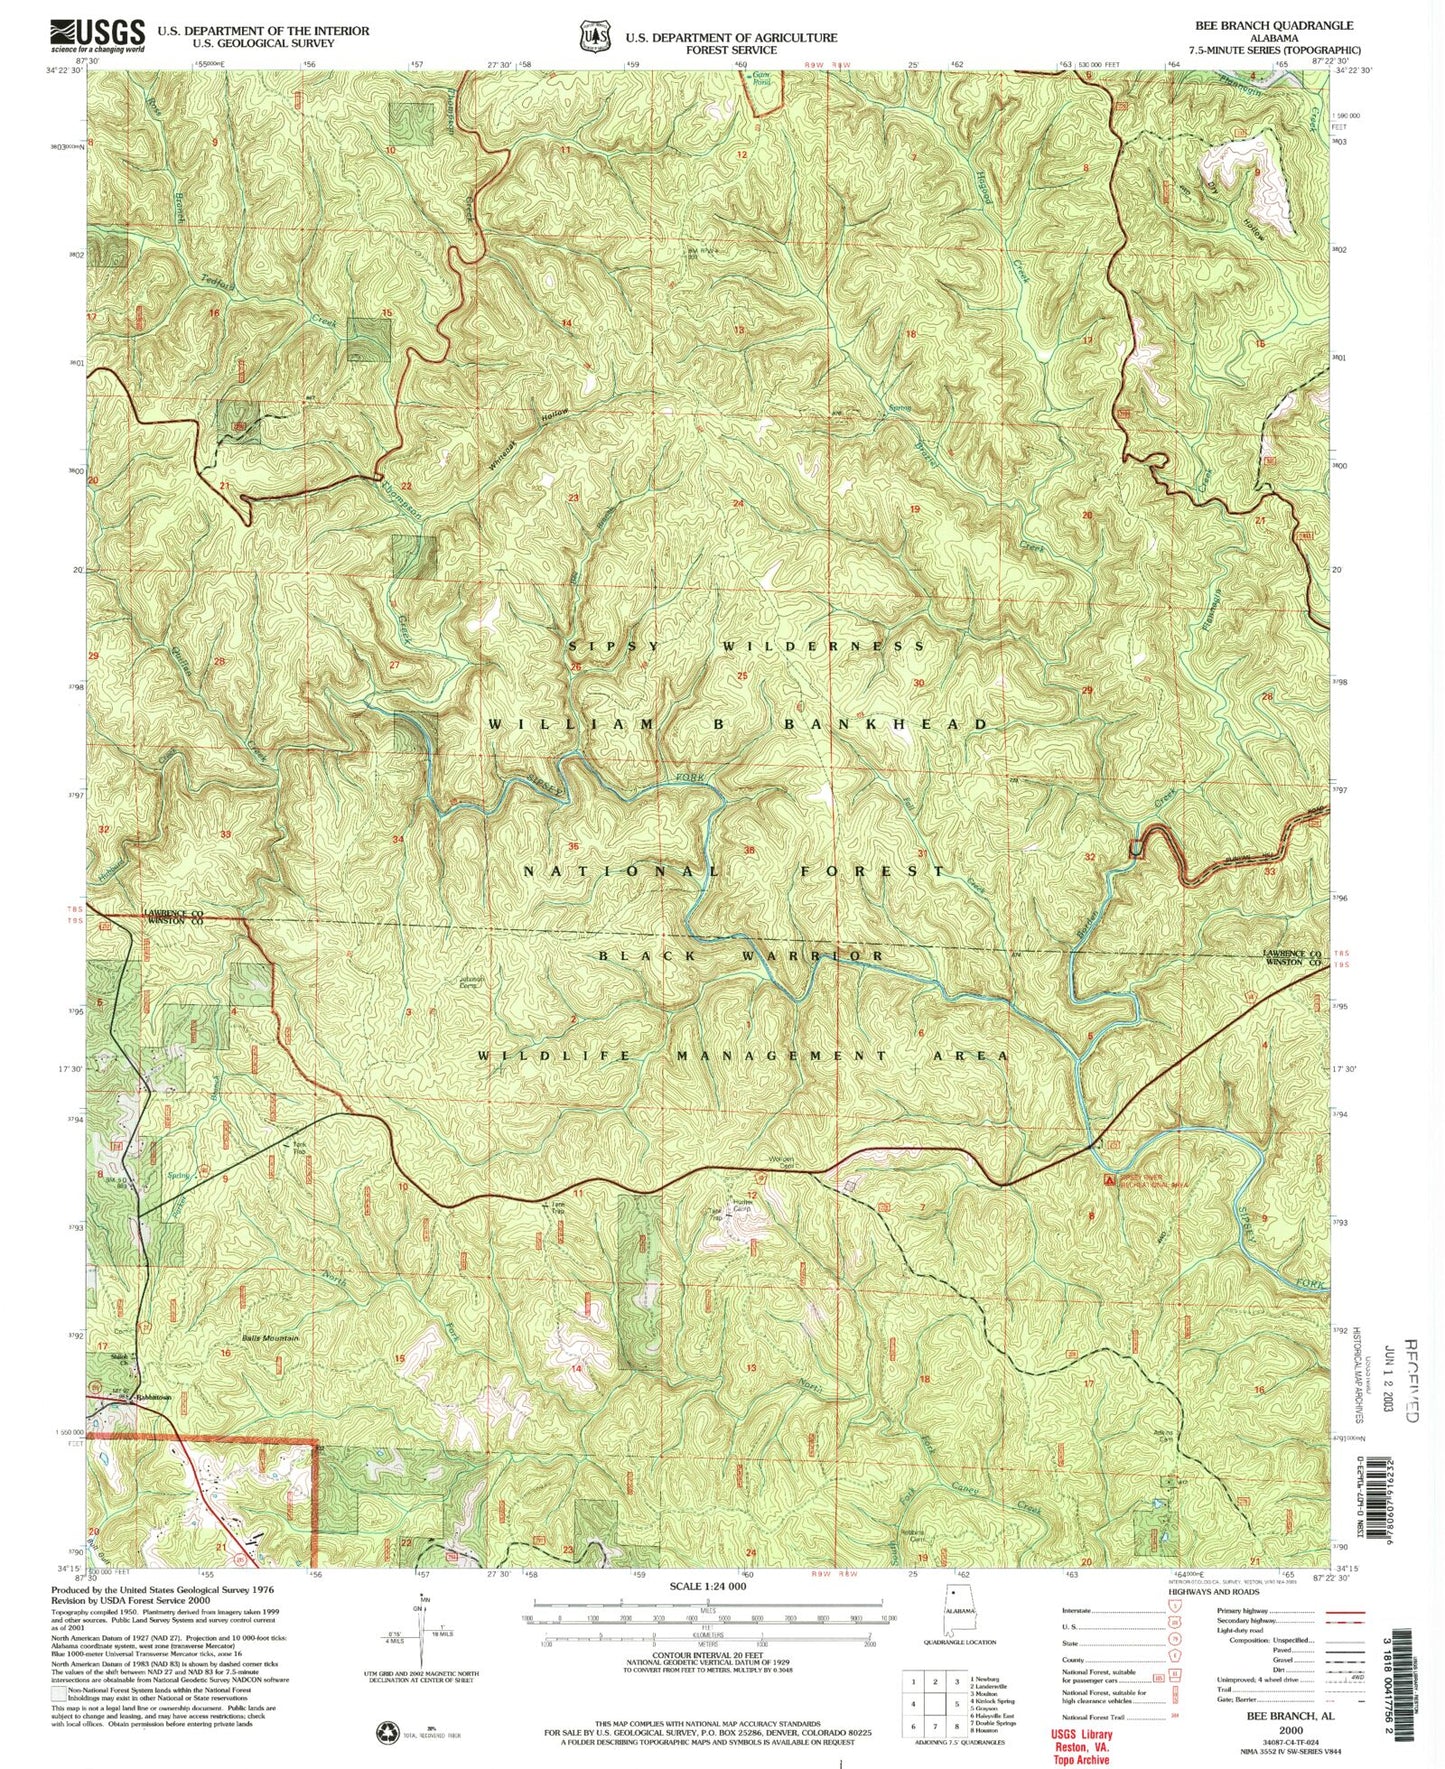 USGS Classic Bee Branch Alabama 7.5'x7.5' Topo Map Image